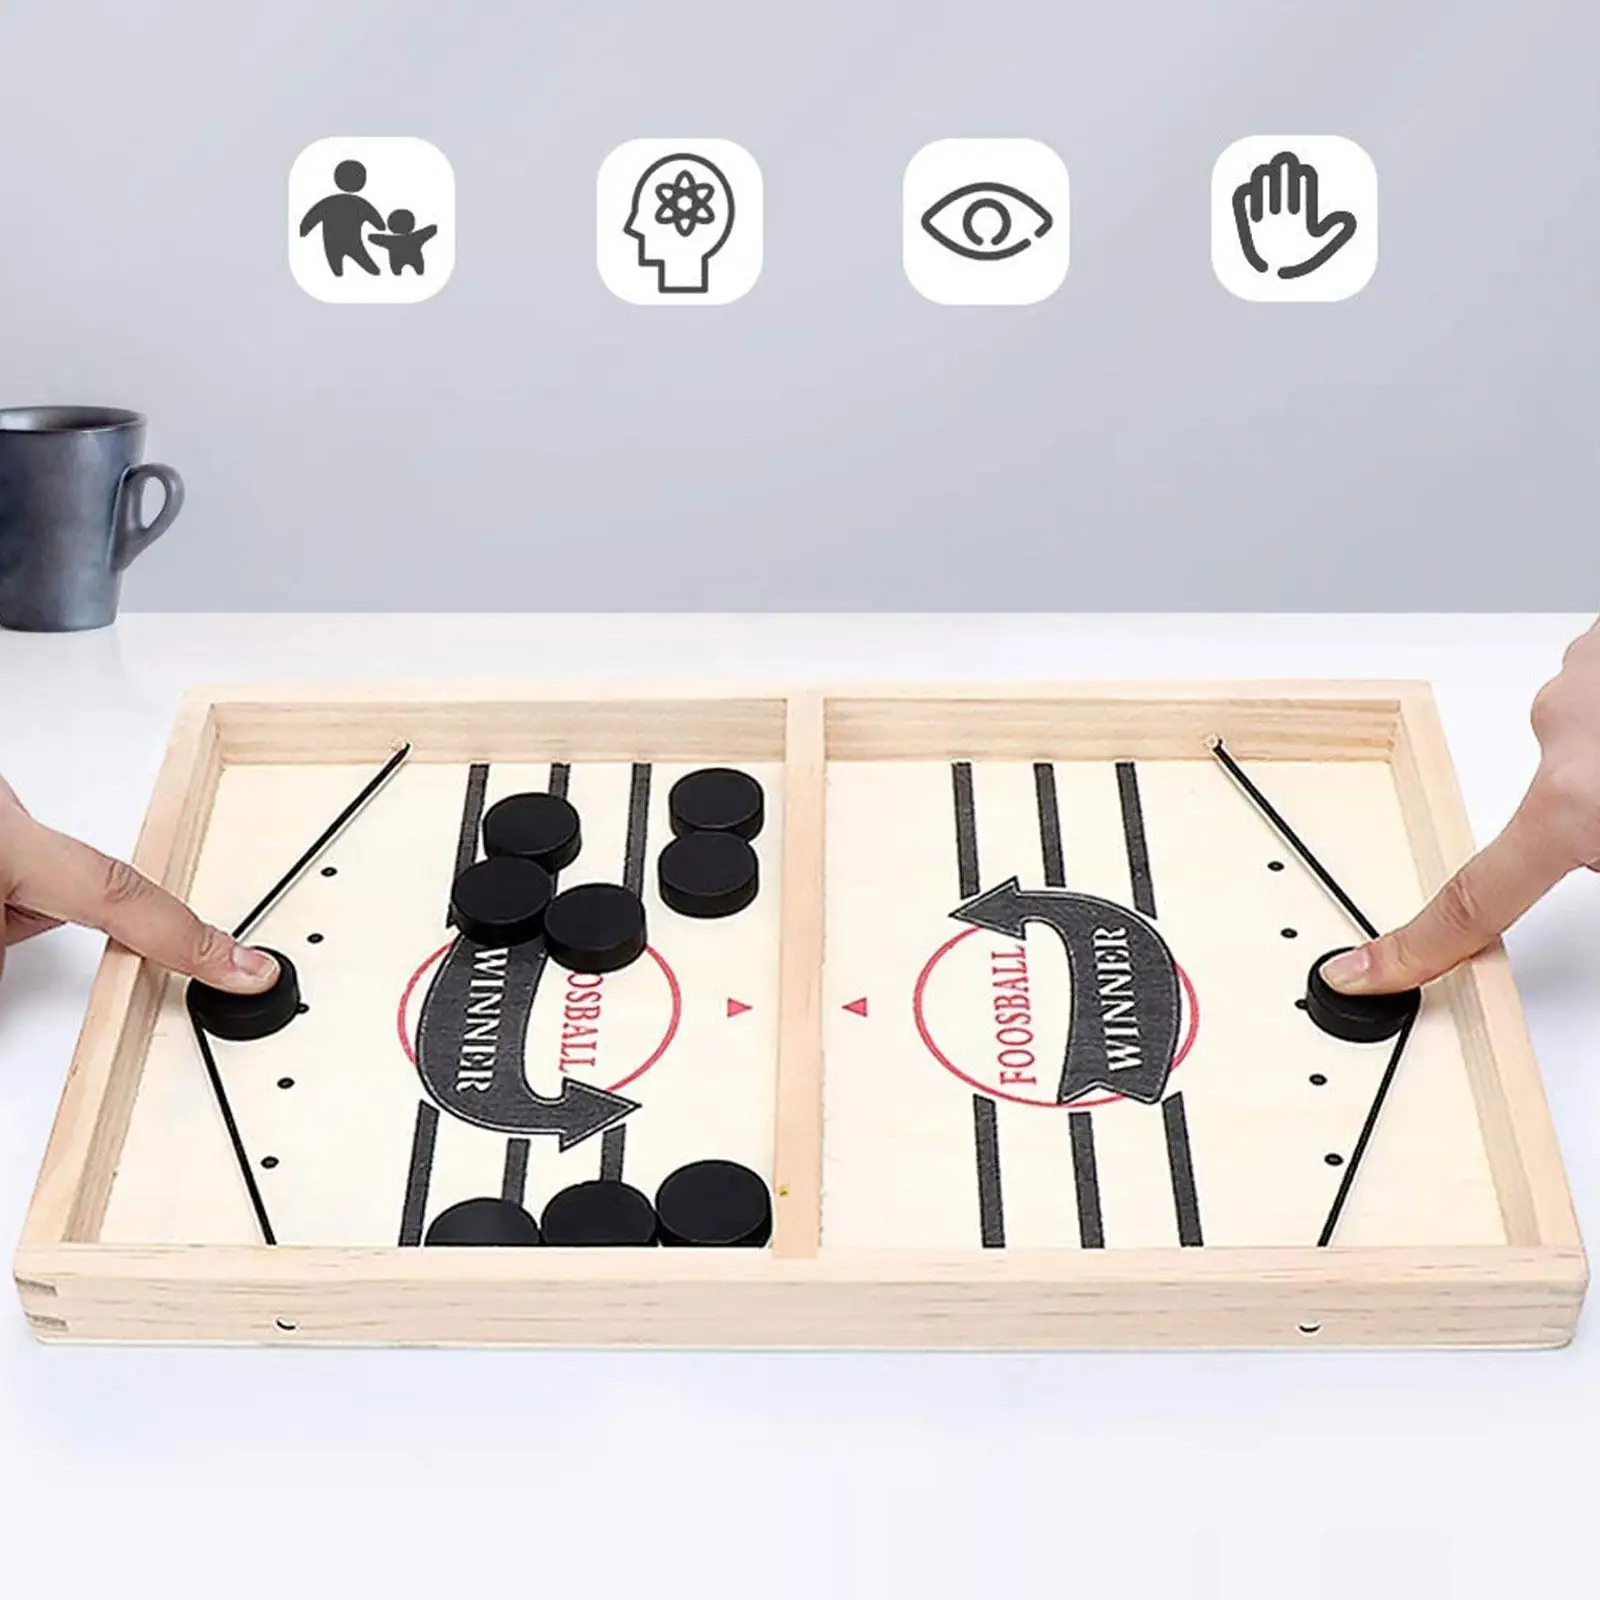 Foosball Winner Games Table Hockey Game Catapult Chess Fast Sling Puck Board Game Toys For Children Parent-child Interactiv G9e4